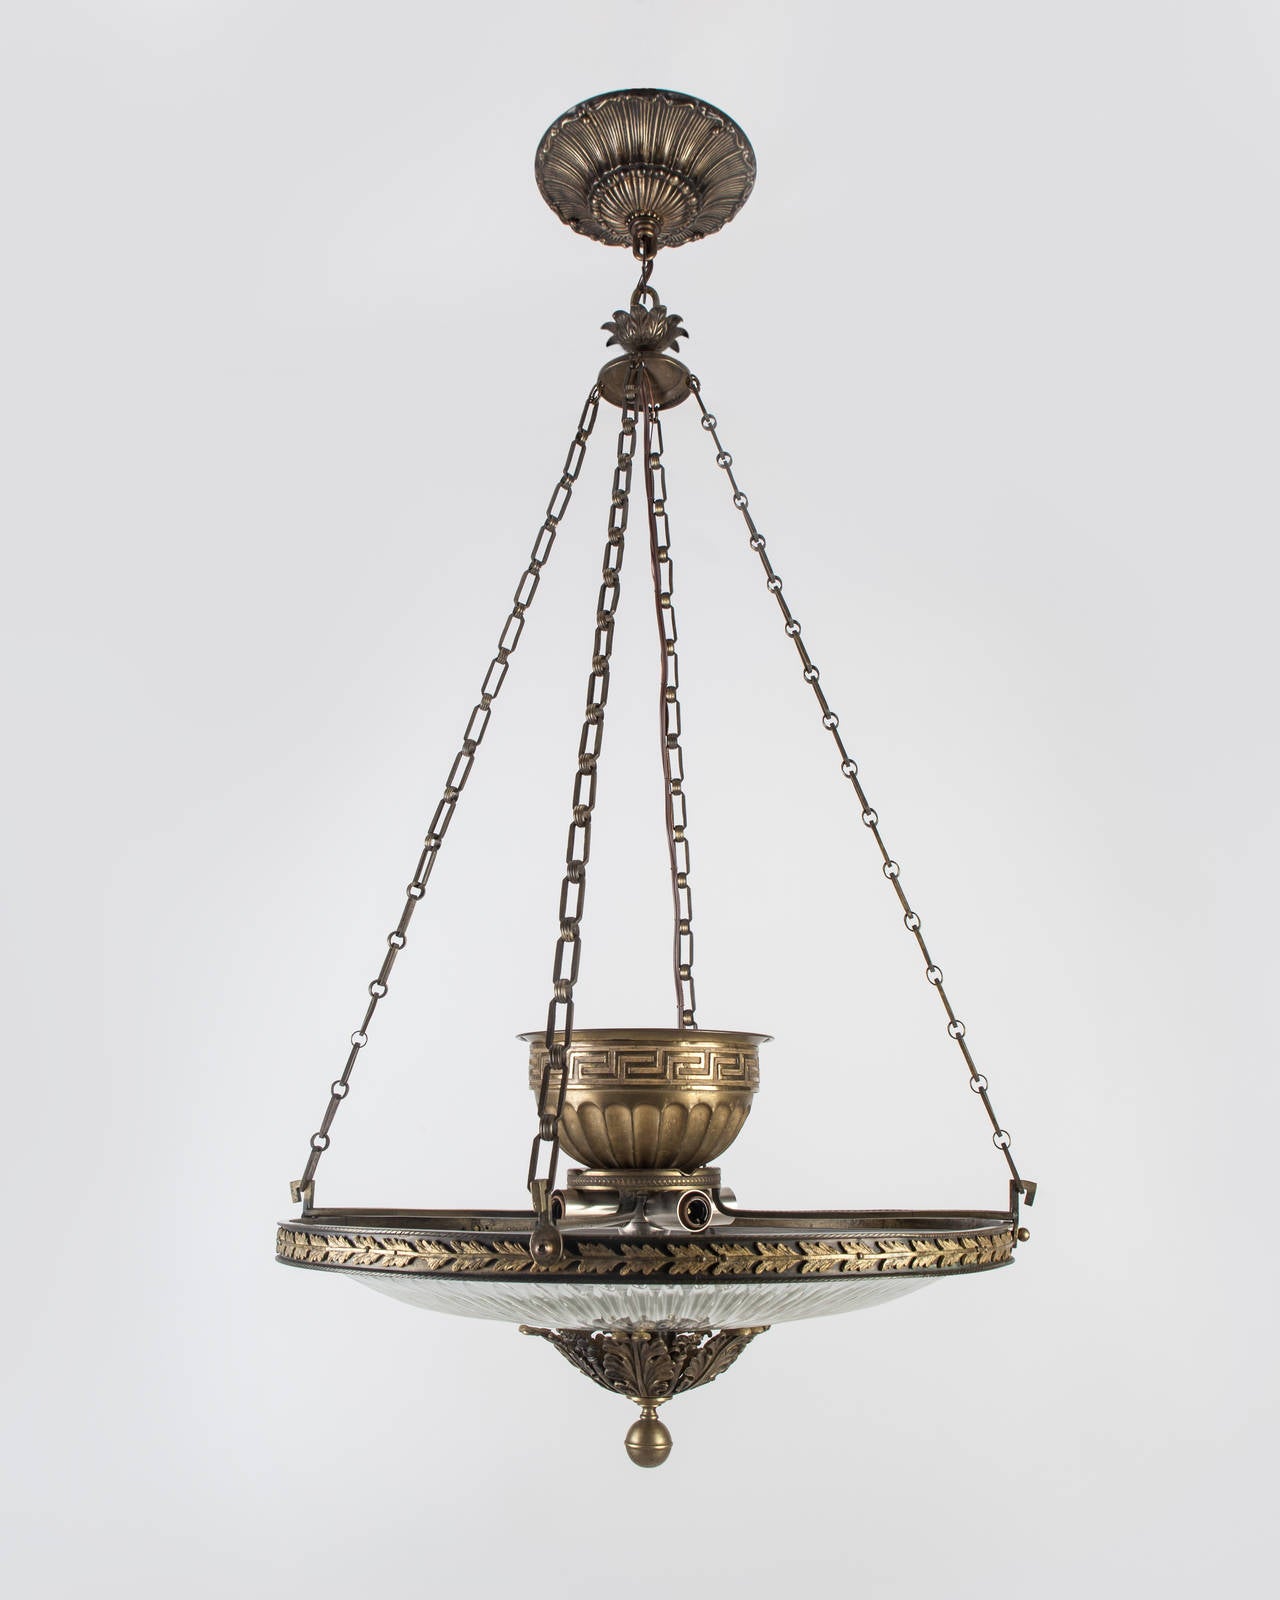 AHL3919

Circa 1900
A regency style chandelier with a cut glass lens held in an age-darkened brass frame. Due to the antique nature of this fixture, there may be some nicks or imperfections in the glass.

DIMENSIONS
Minimum height: